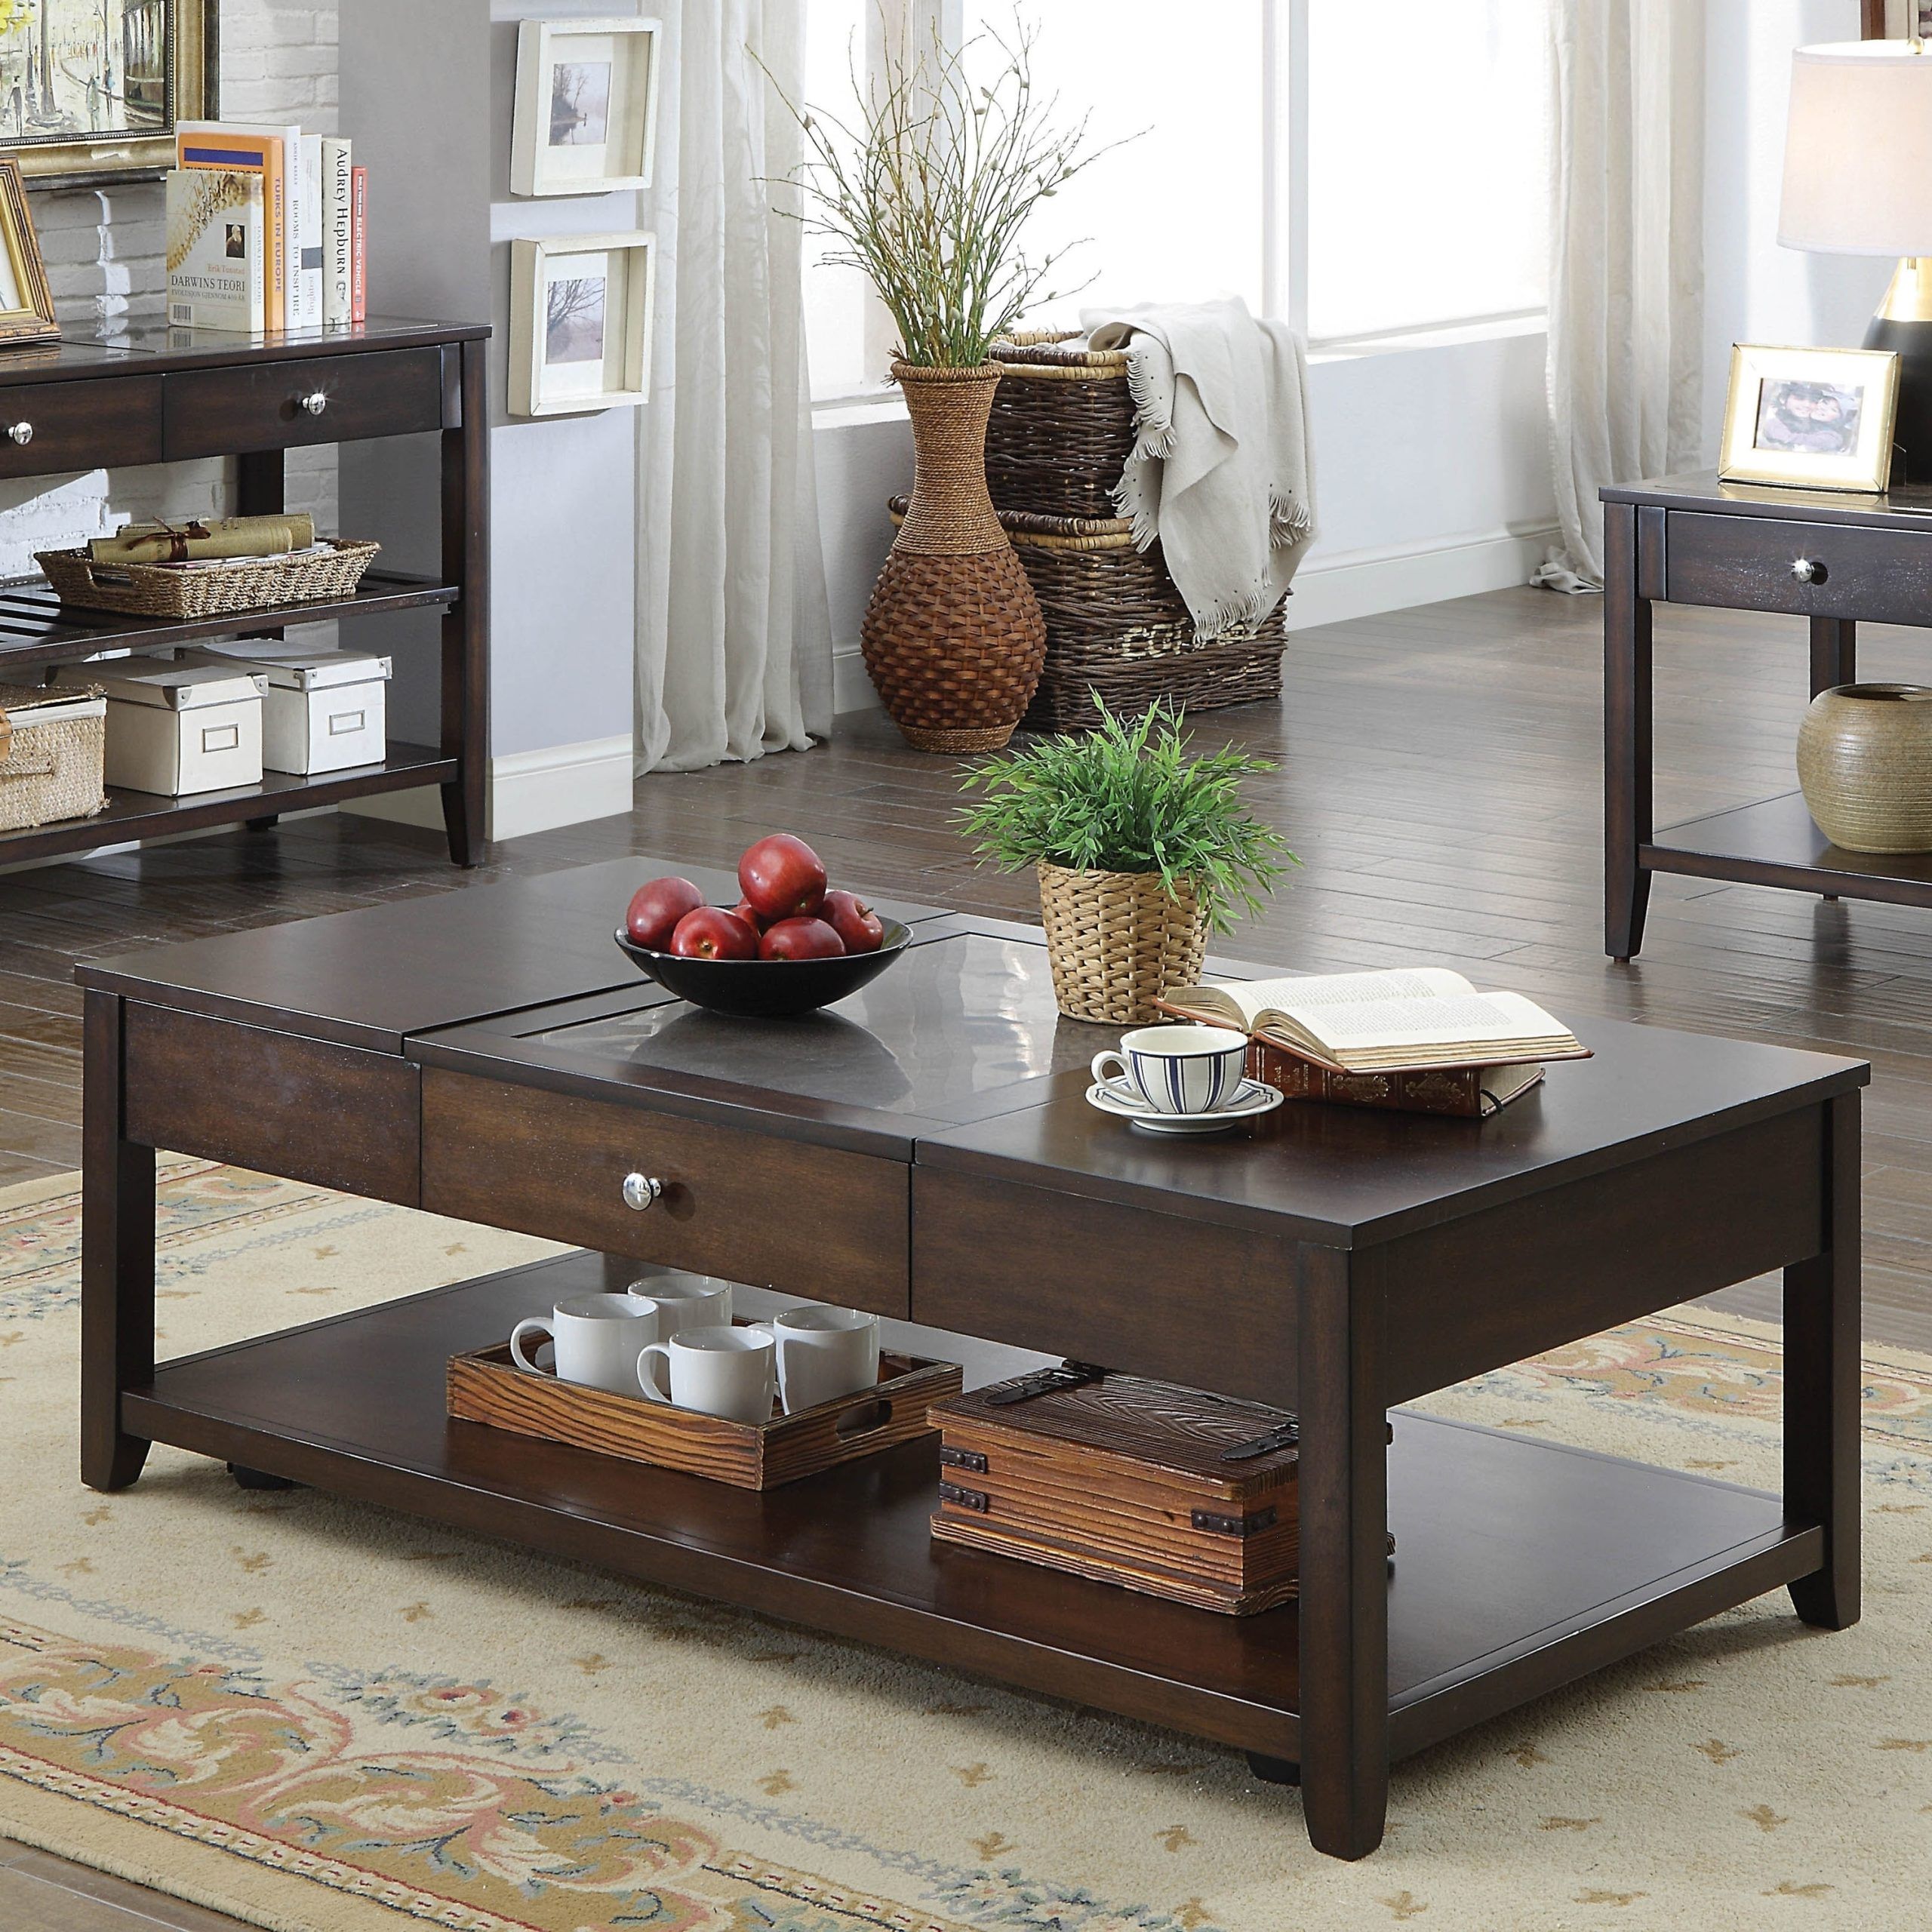 Espresso Coffee Table And End Tables – Includes 1 End Table Pertaining To Espresso Wood Finish Coffee Tables (View 2 of 21)